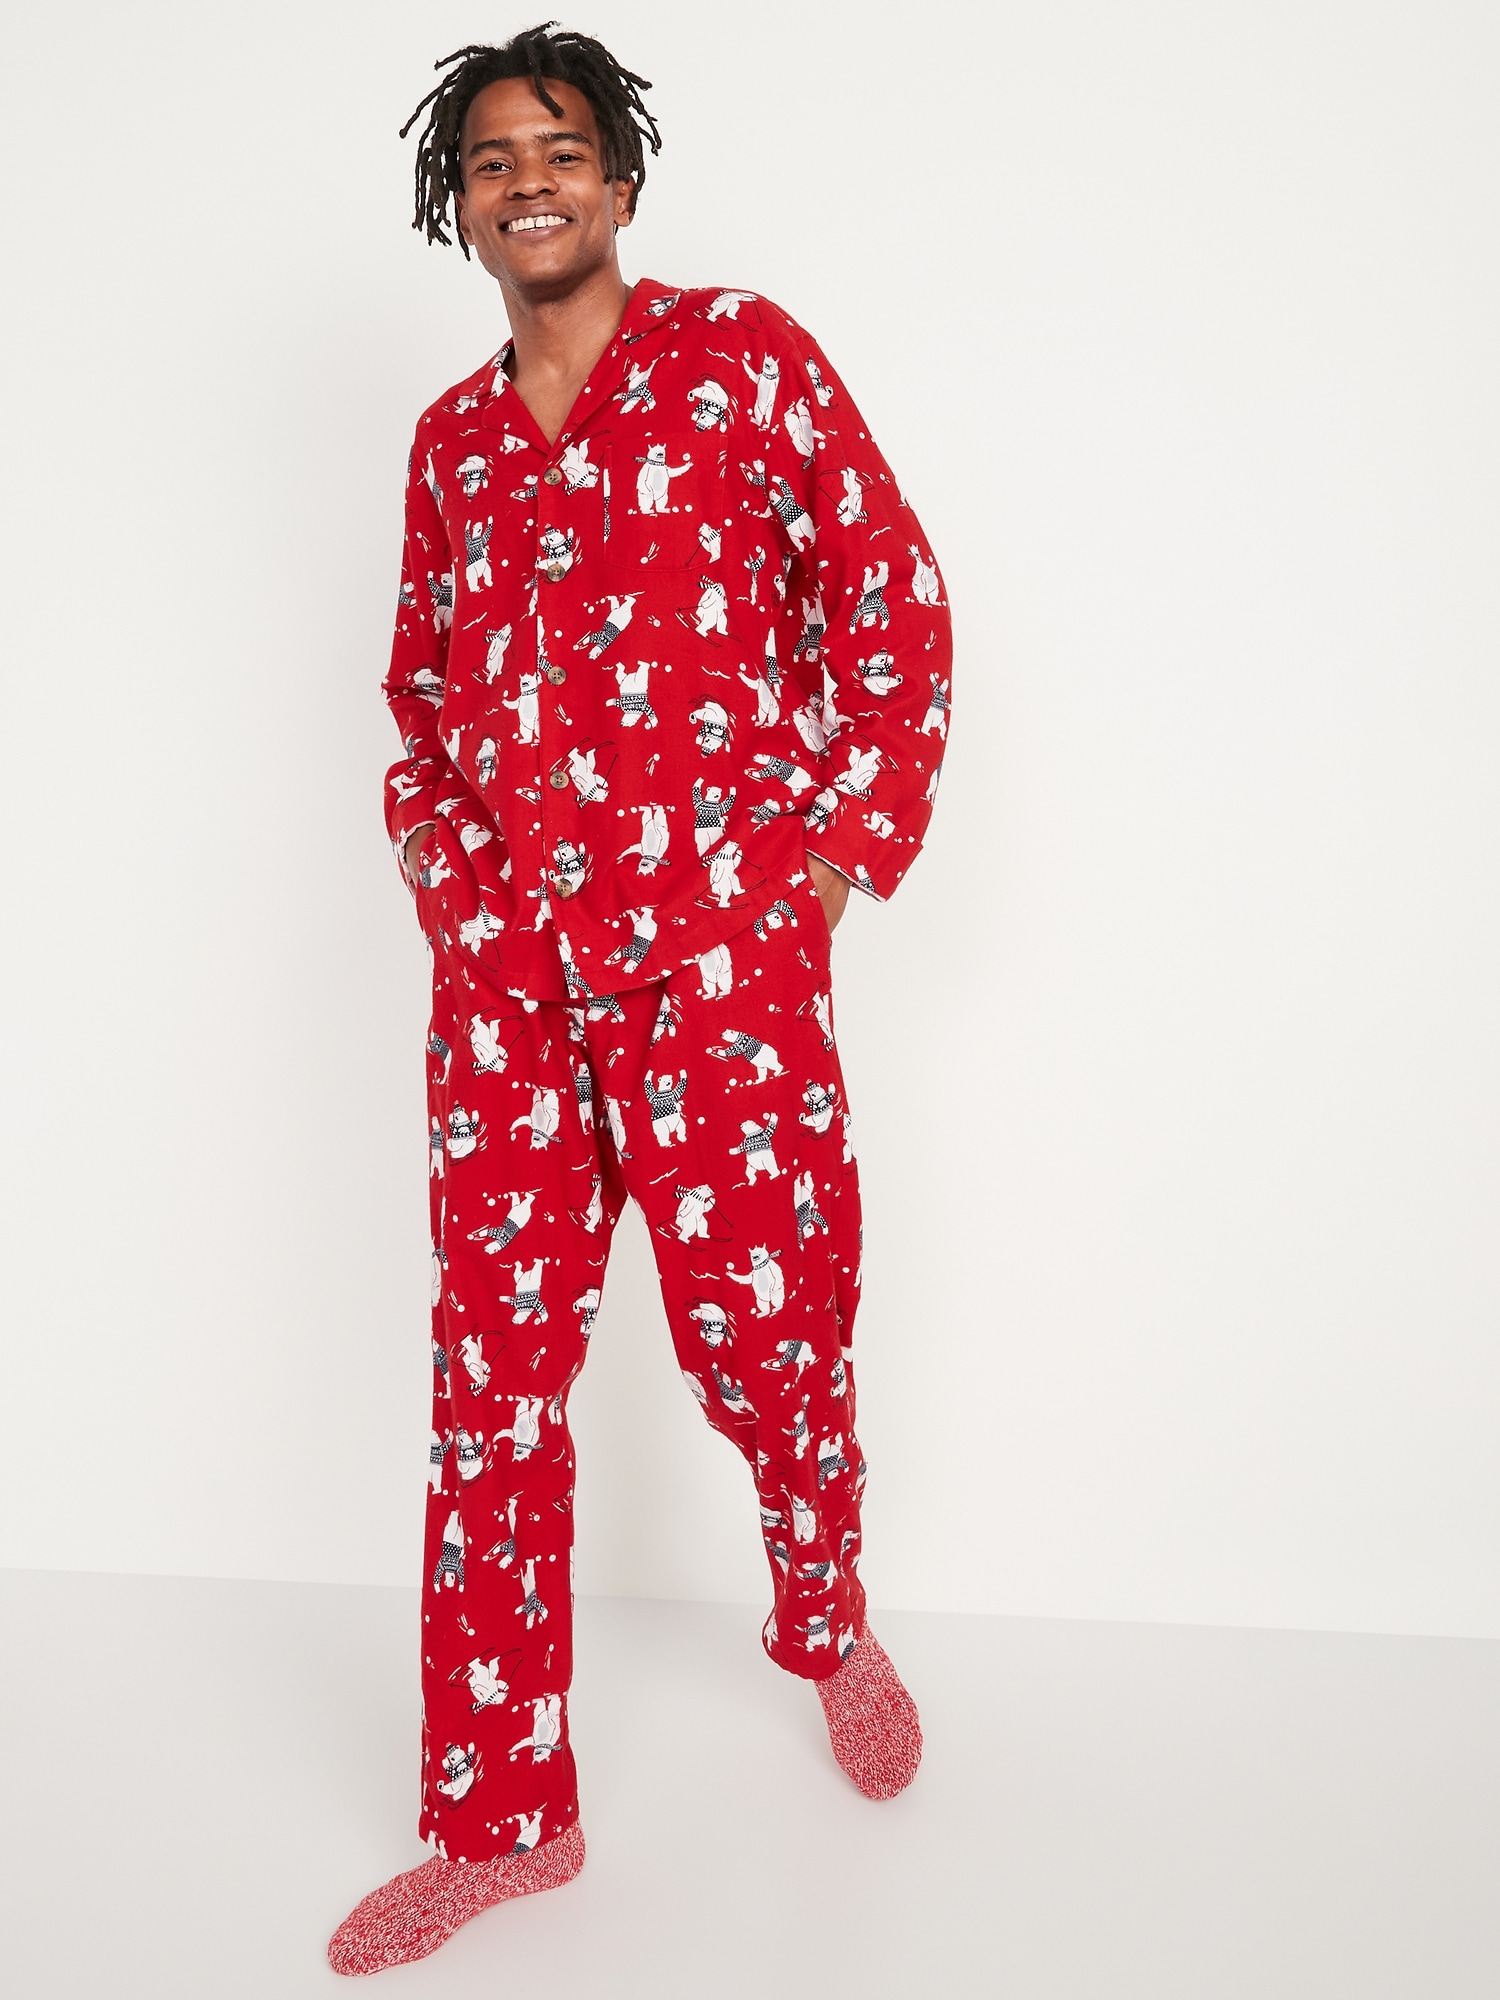 He garden frequently holiday flannel pajamas Classification Disgust Pleated